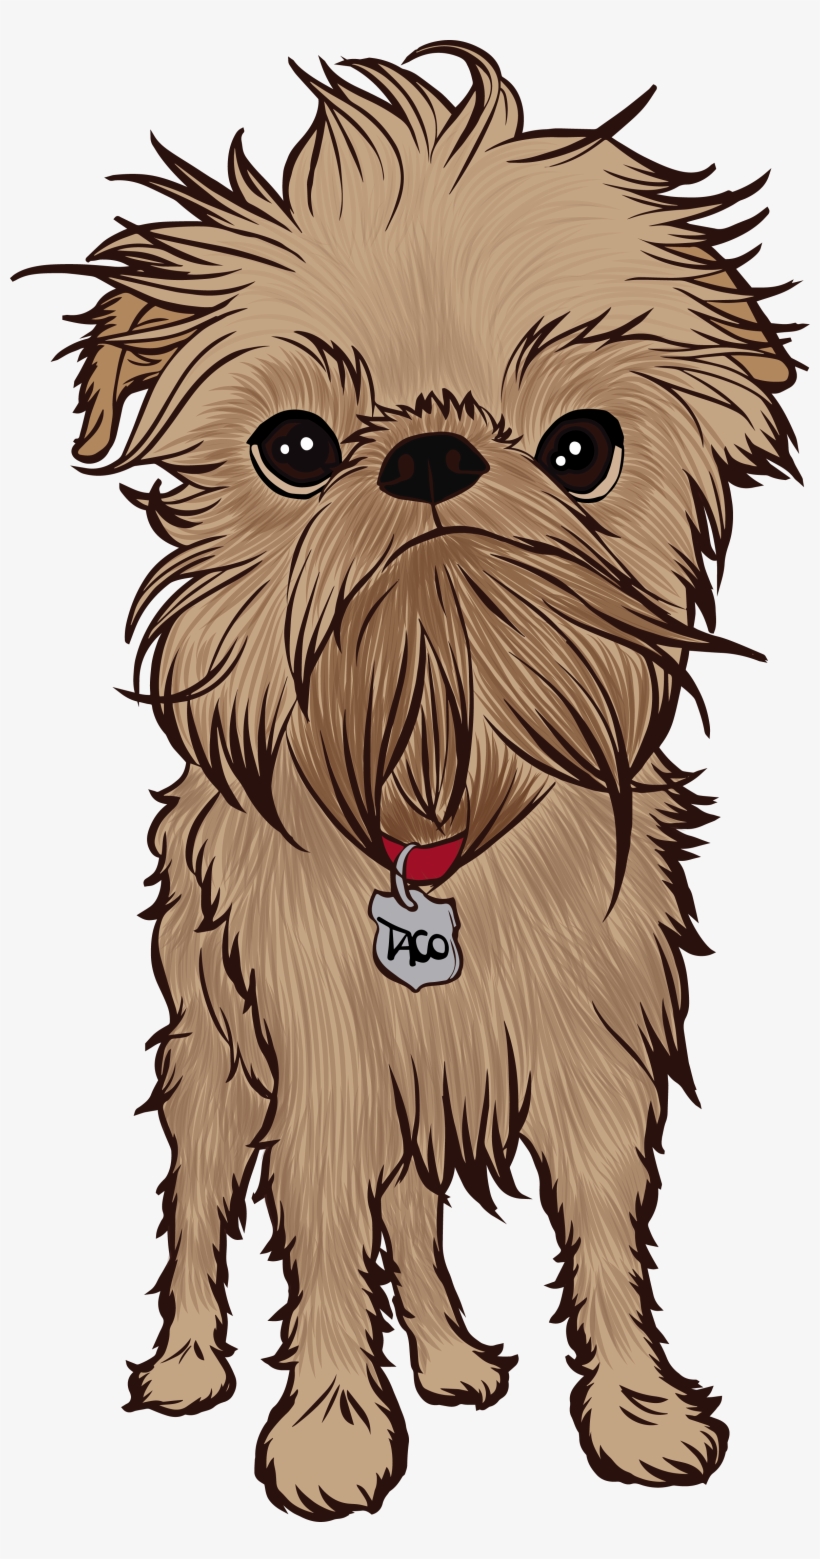 For The Background I Used A Simple Rectangle And An - Yorkshire Terrier, transparent png #1494941